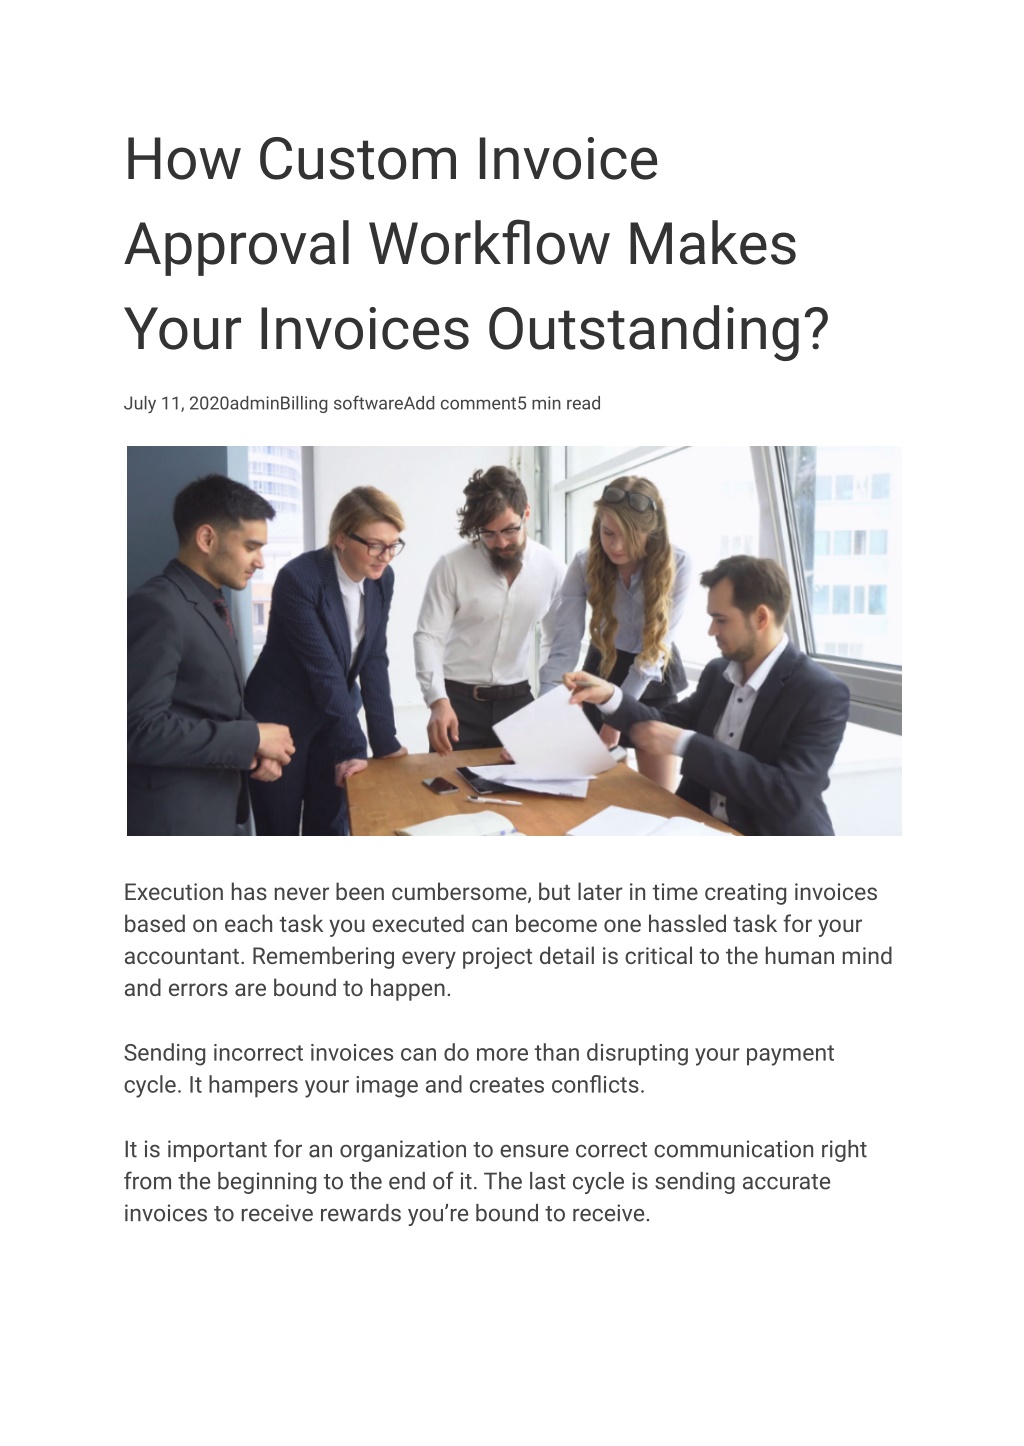 Ppt How Custom Invoice Approval Workflow Makes Your Invoices Outstanding Powerpoint 5086